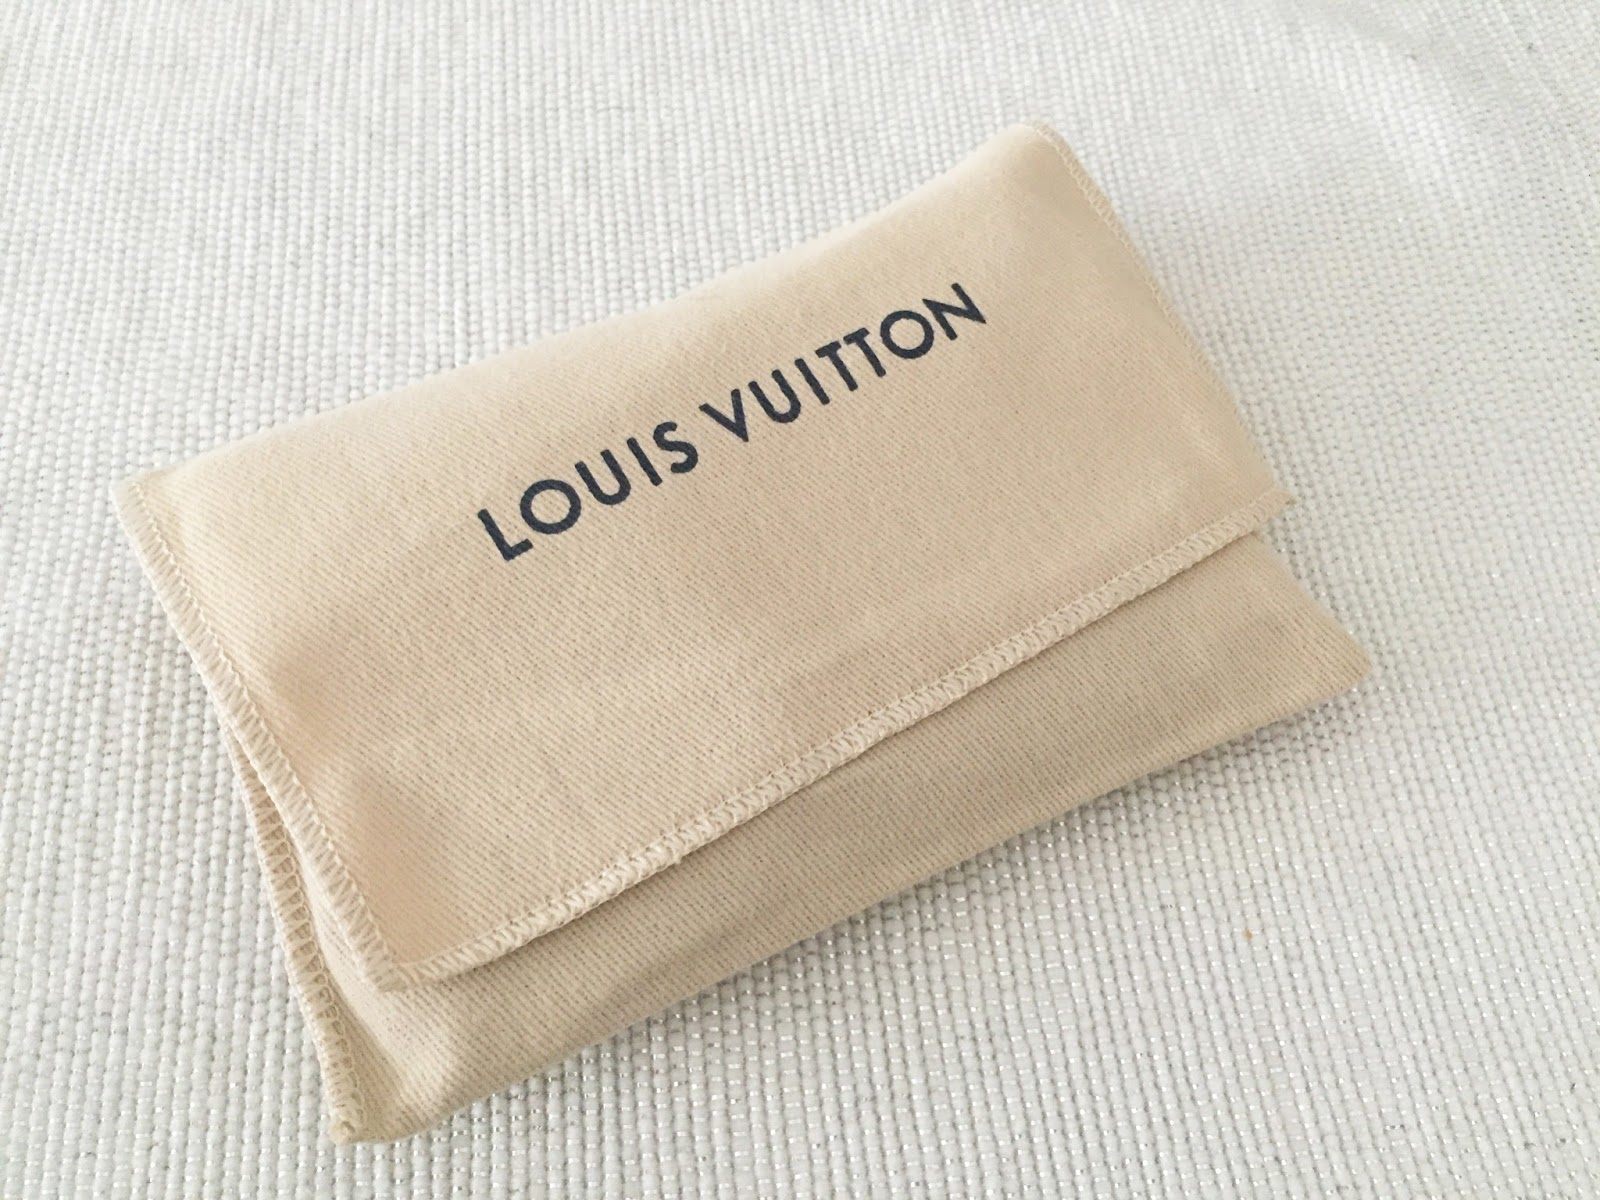 Unbox my new Louis Vuitton key pouch with me #new #unboxing #unbox #lo